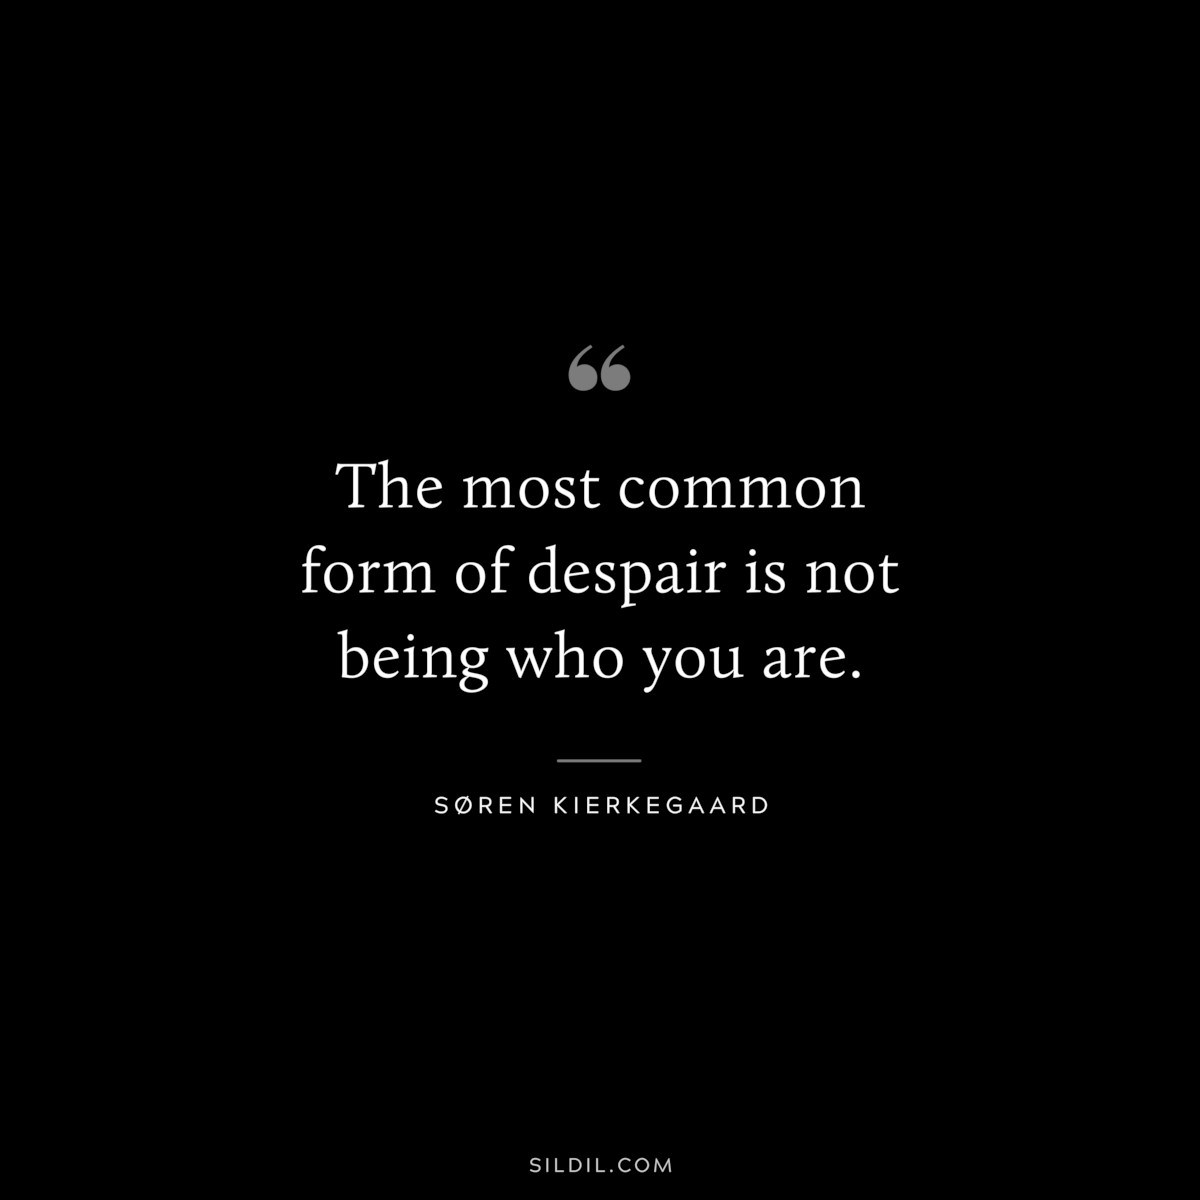 The most common form of despair is not being who you are. ― Søren Kierkegaard